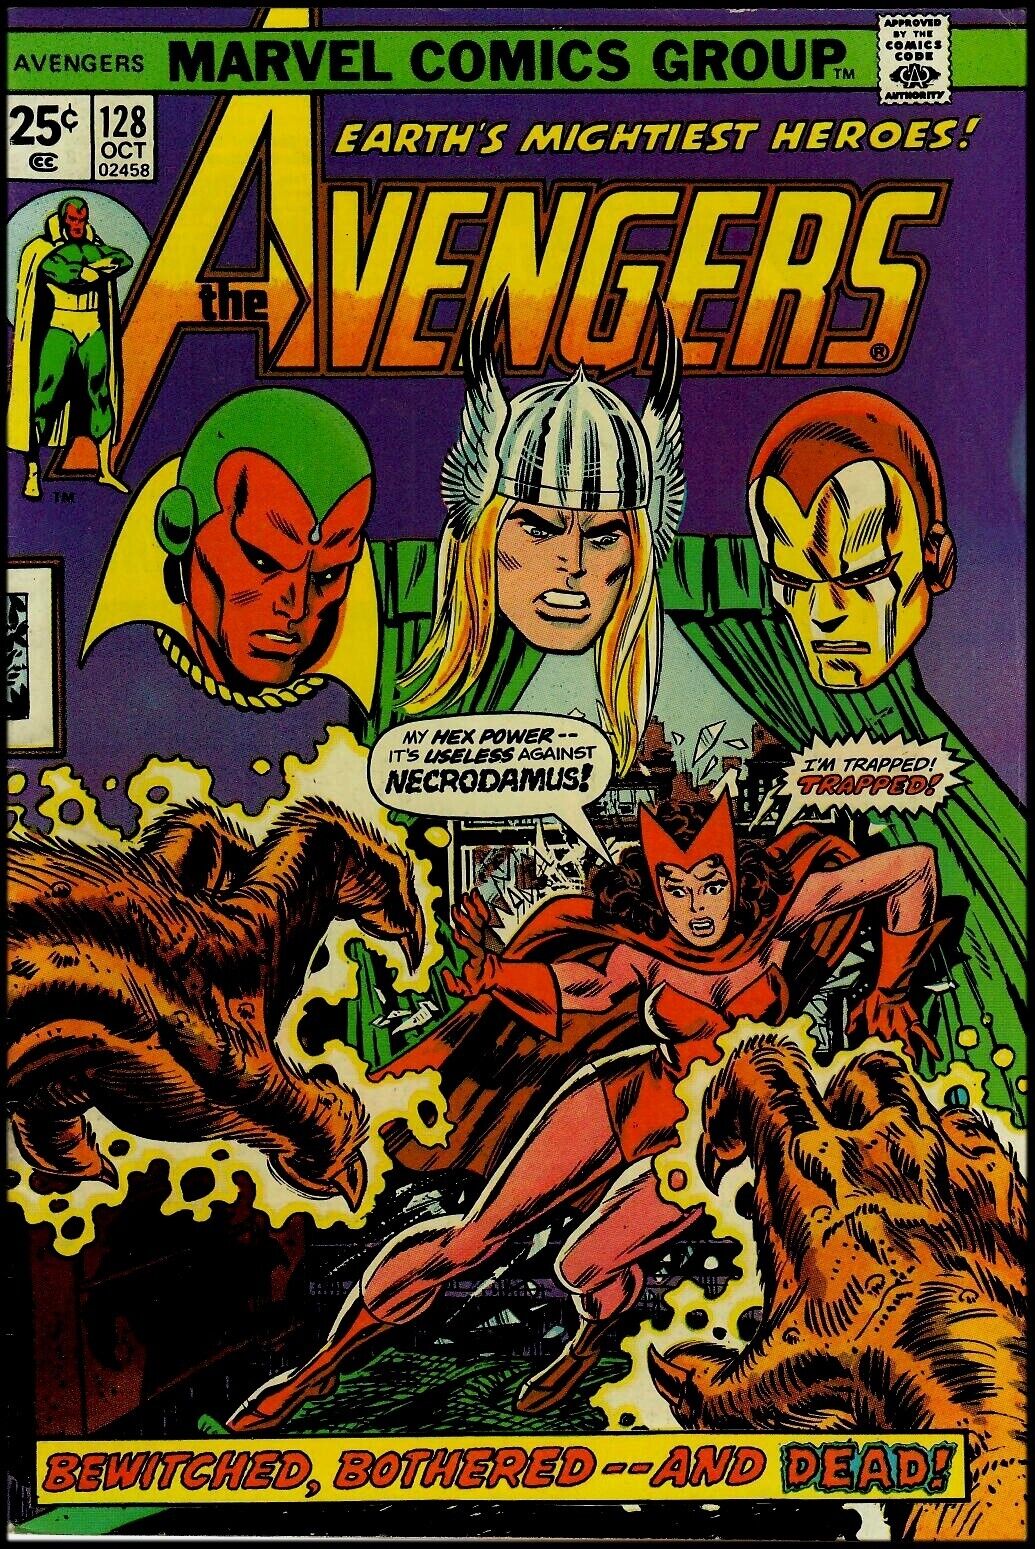 Avengers (1963 series) #128 VG+ Condition • Marvel Comics • October 1974